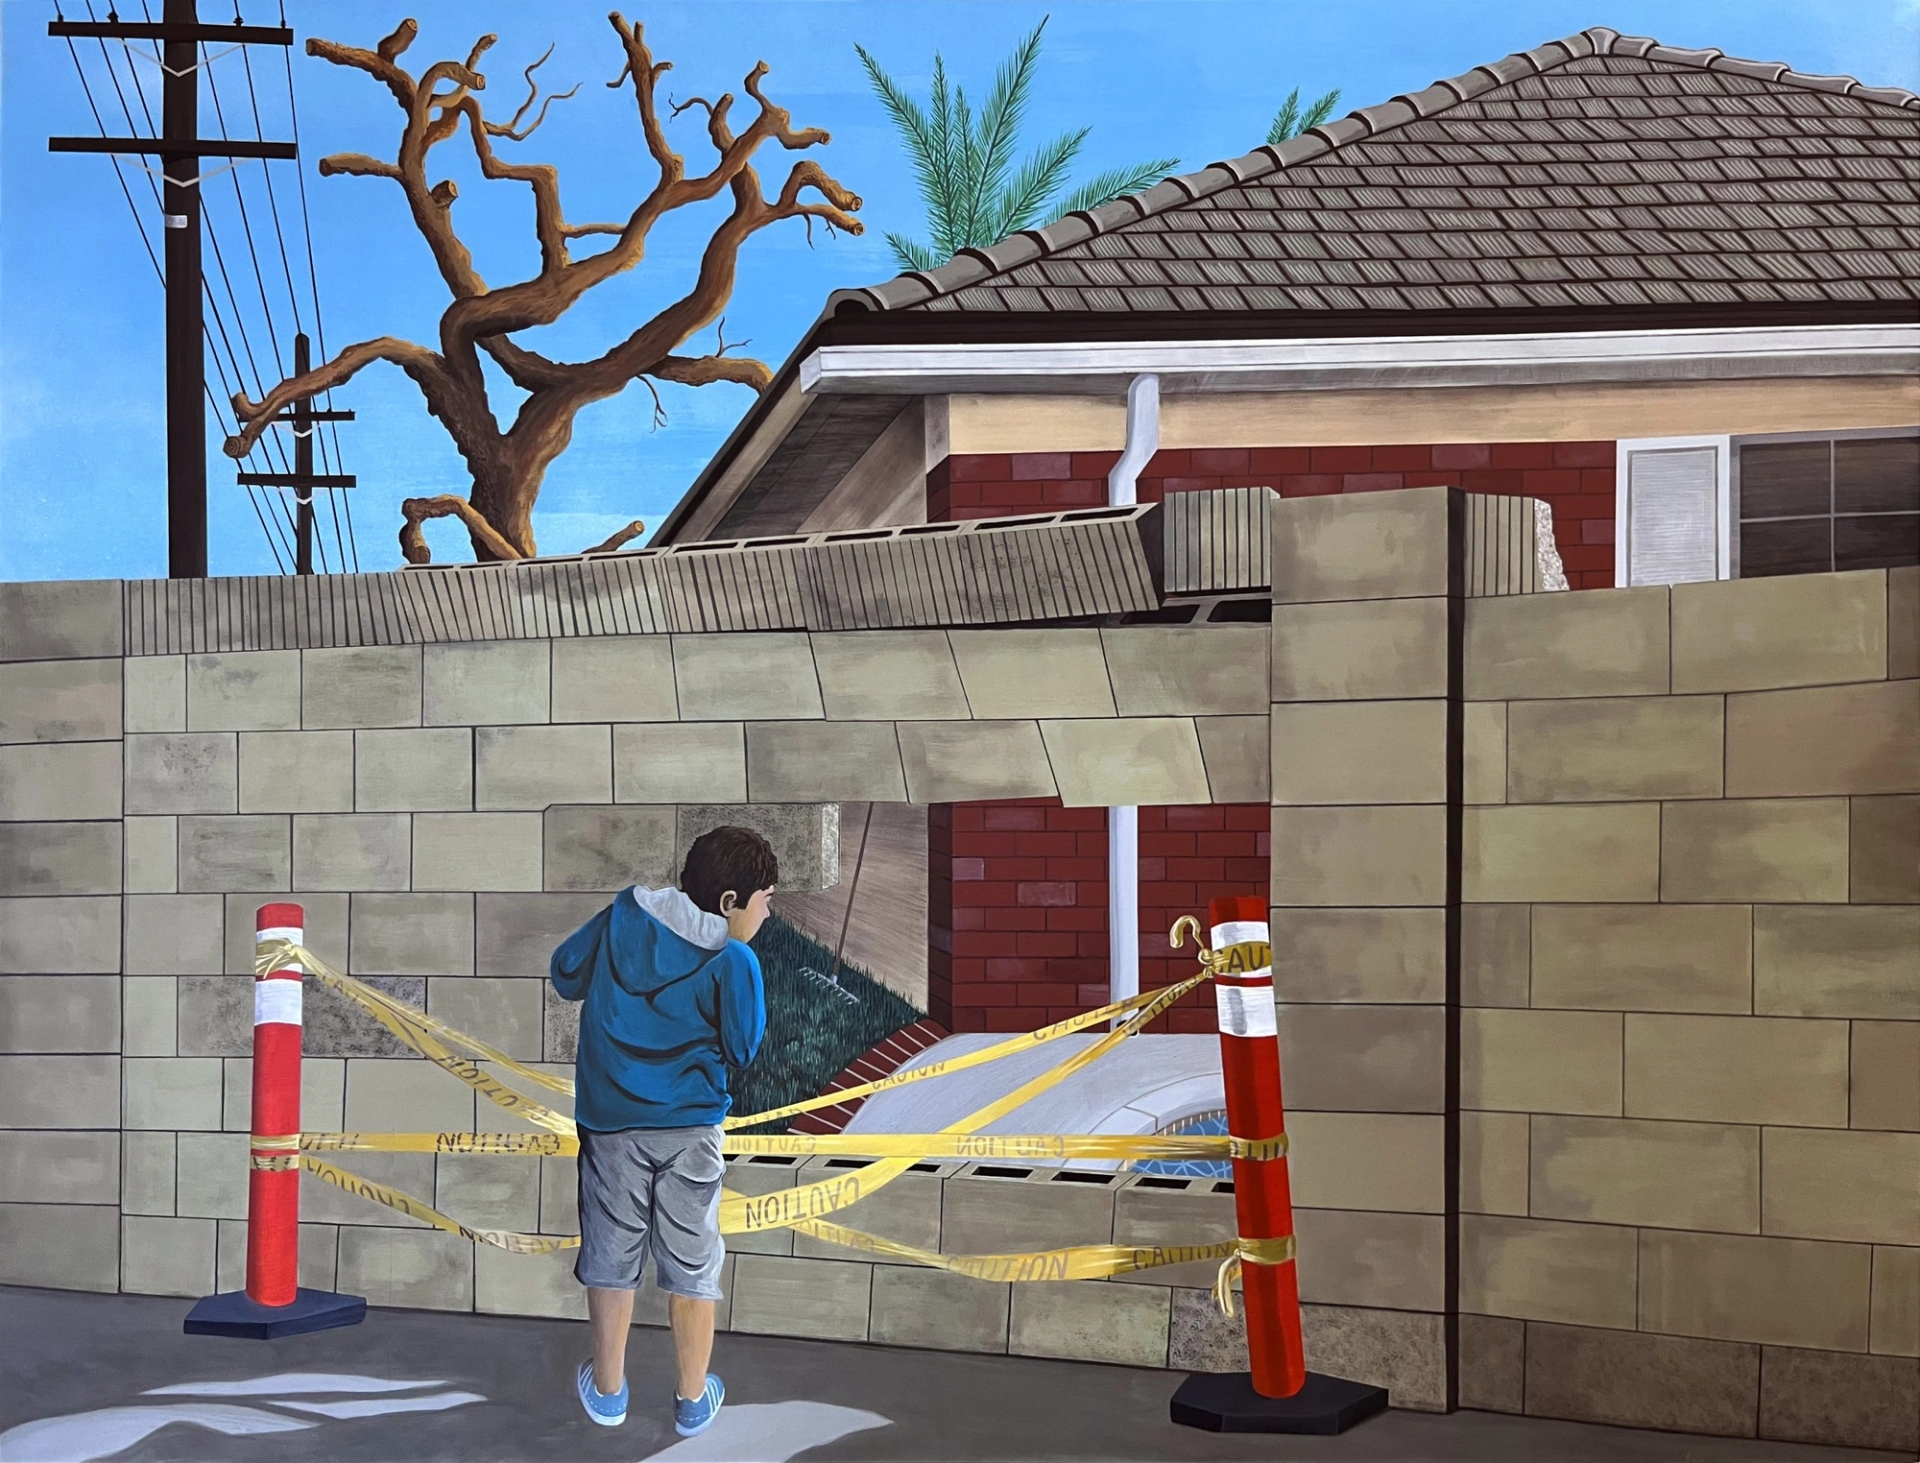 Ed Templeton, A Peek into the Rabbit Hole, 2021. Courtesy of the artist and Roberts Projects, Los Angeles.